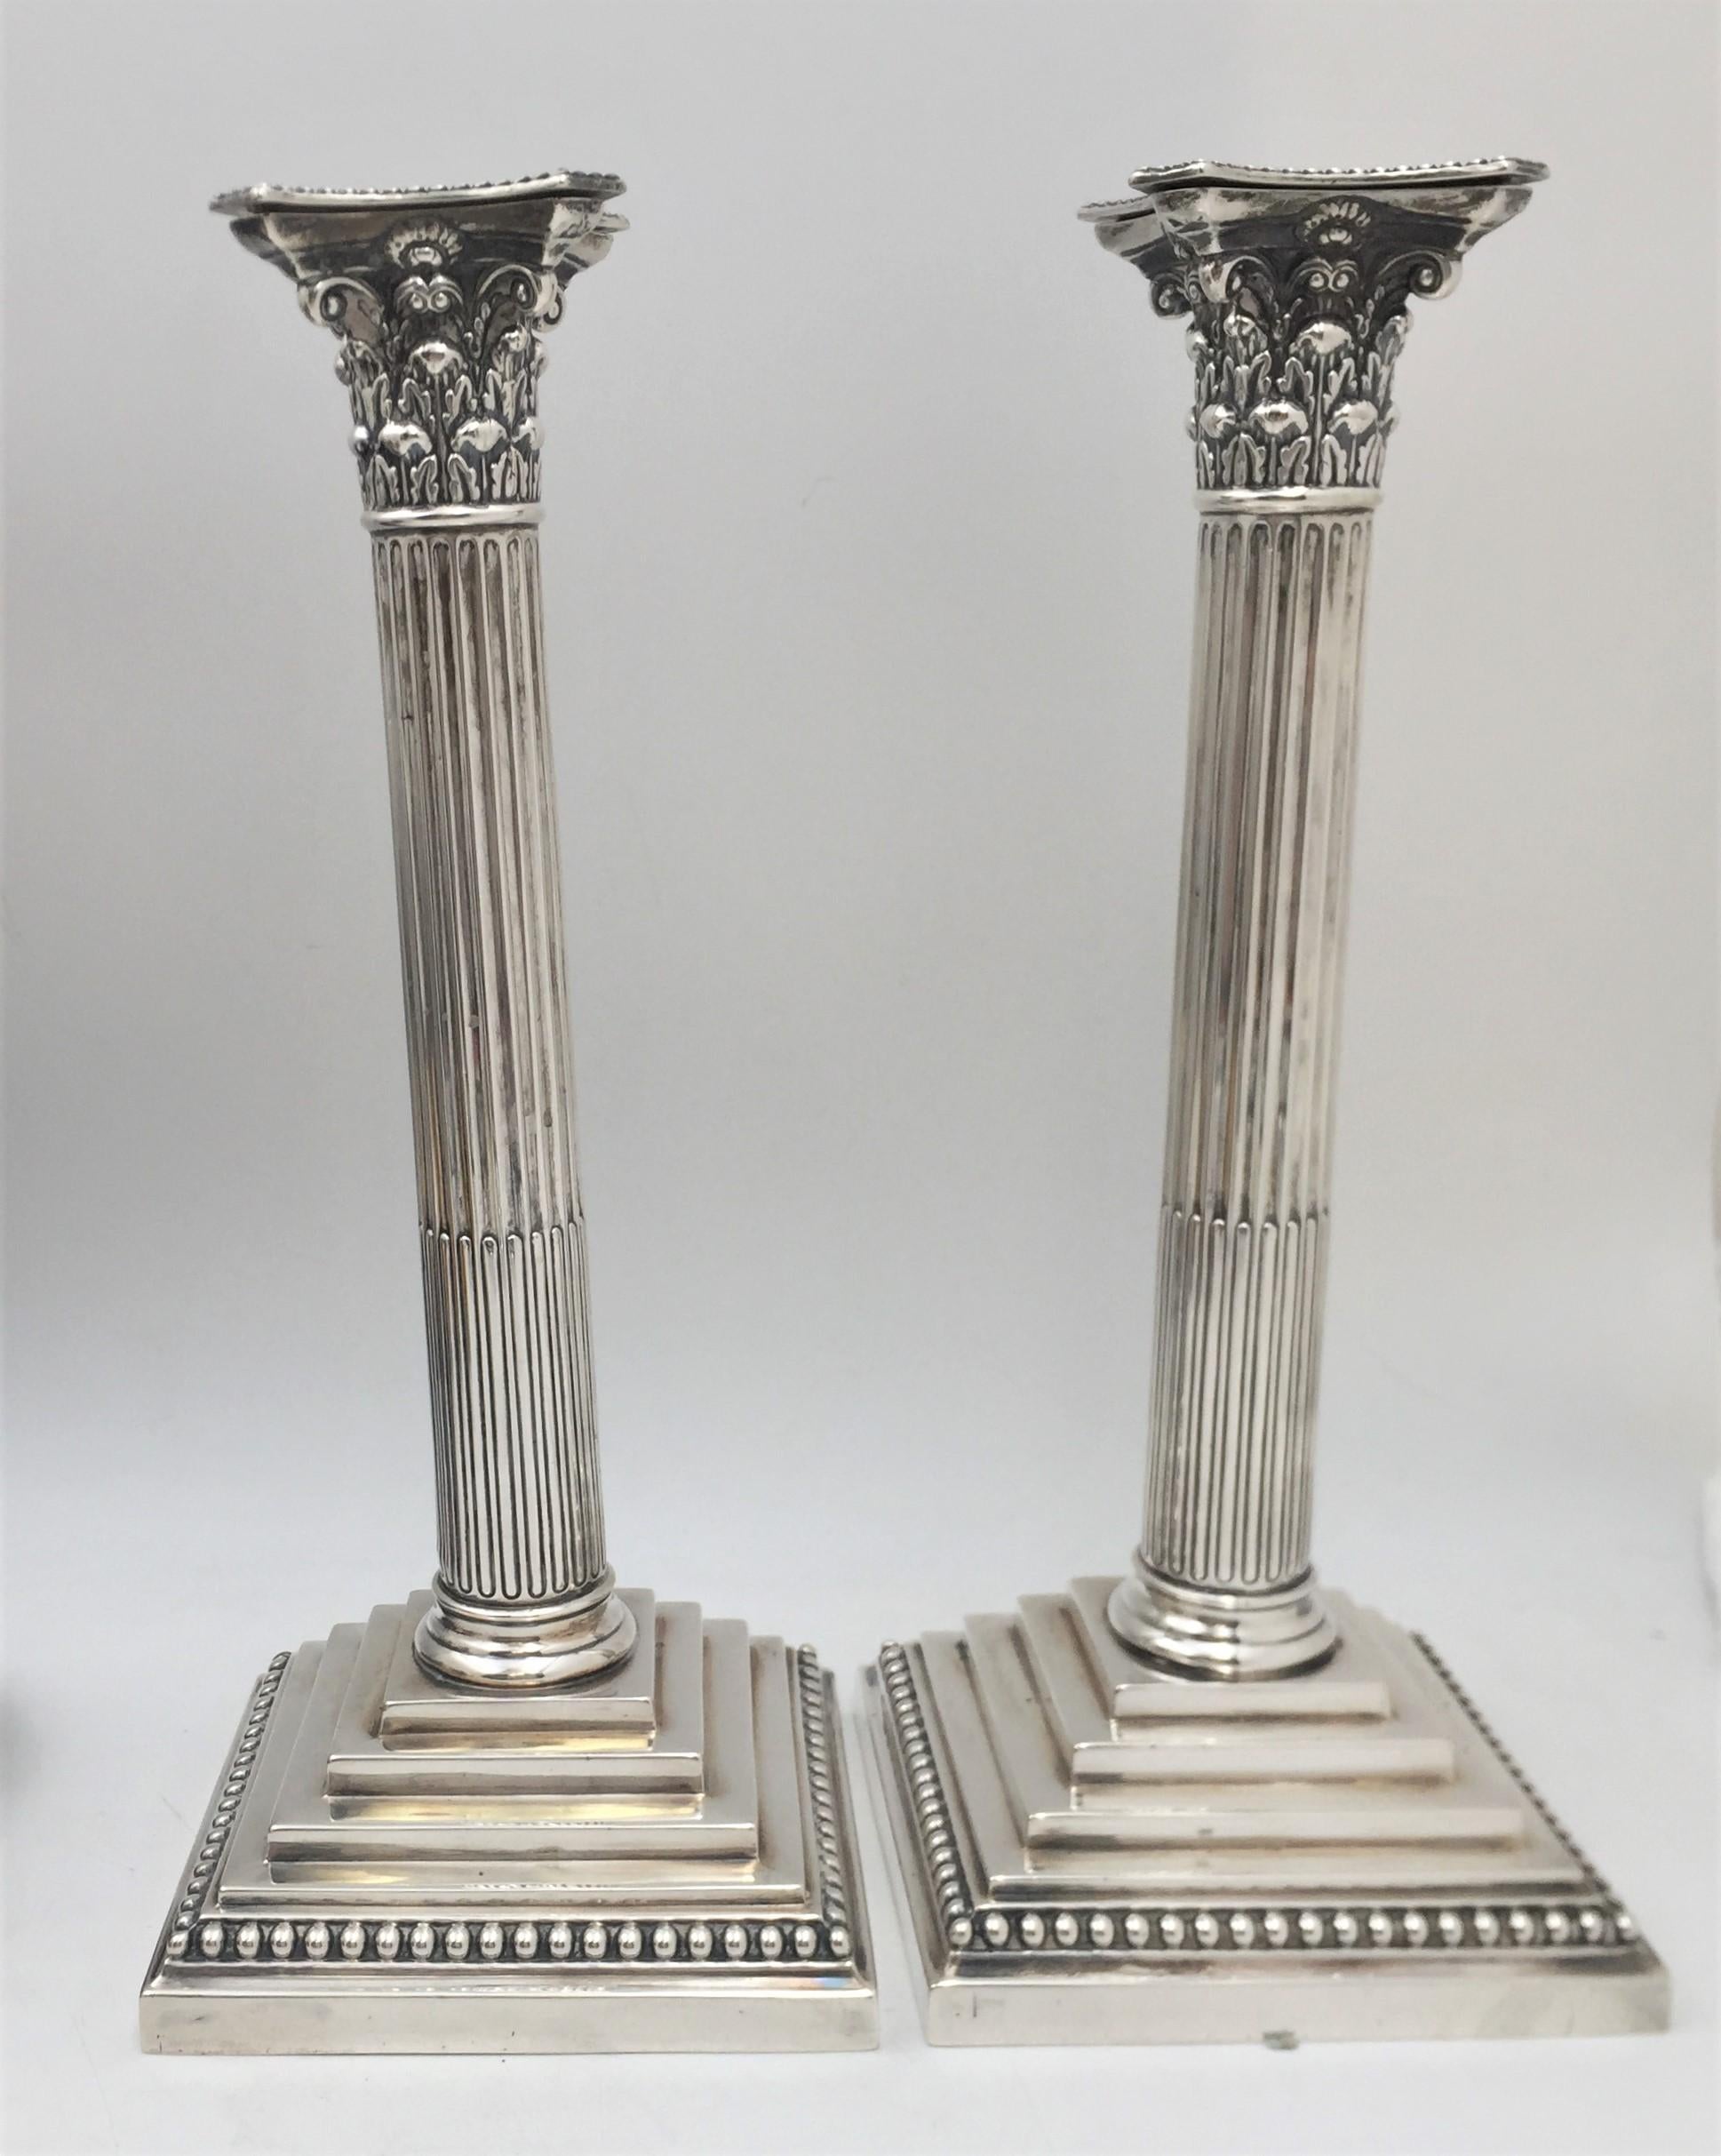 Edward Hutton pair of sterling silver candlesticks from 1893 in Neoclassical style from the Victorian era. Elegantly designed as Corinthia columns standing on a square base with a beaded rim, these candlesticks measure 12'' in height by 4 1/2'' in